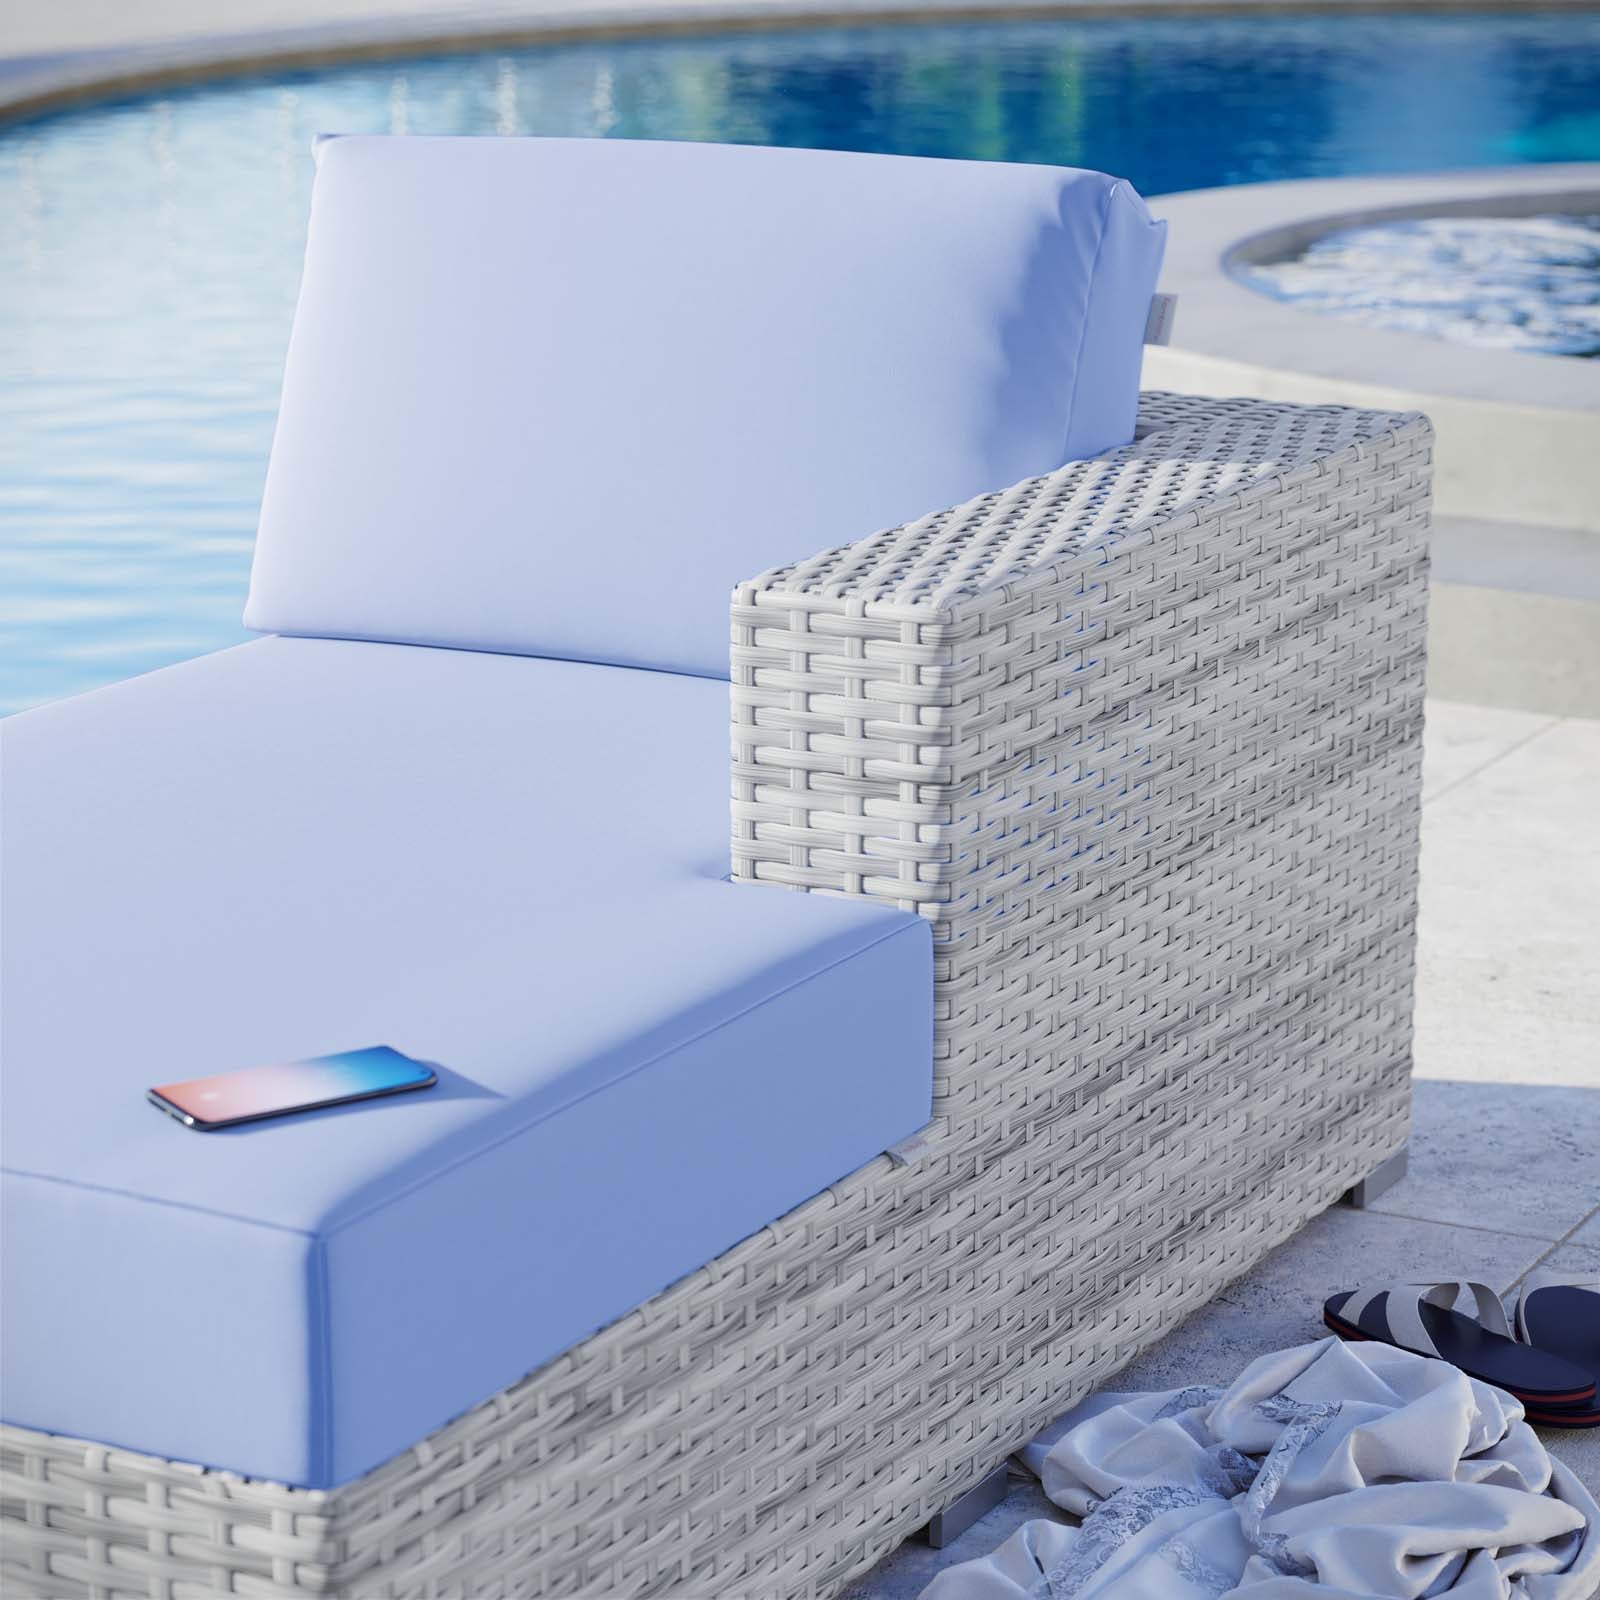 Convene Outdoor Patio Right Chaise-Outdoor Chaise-Modway-Wall2Wall Furnishings